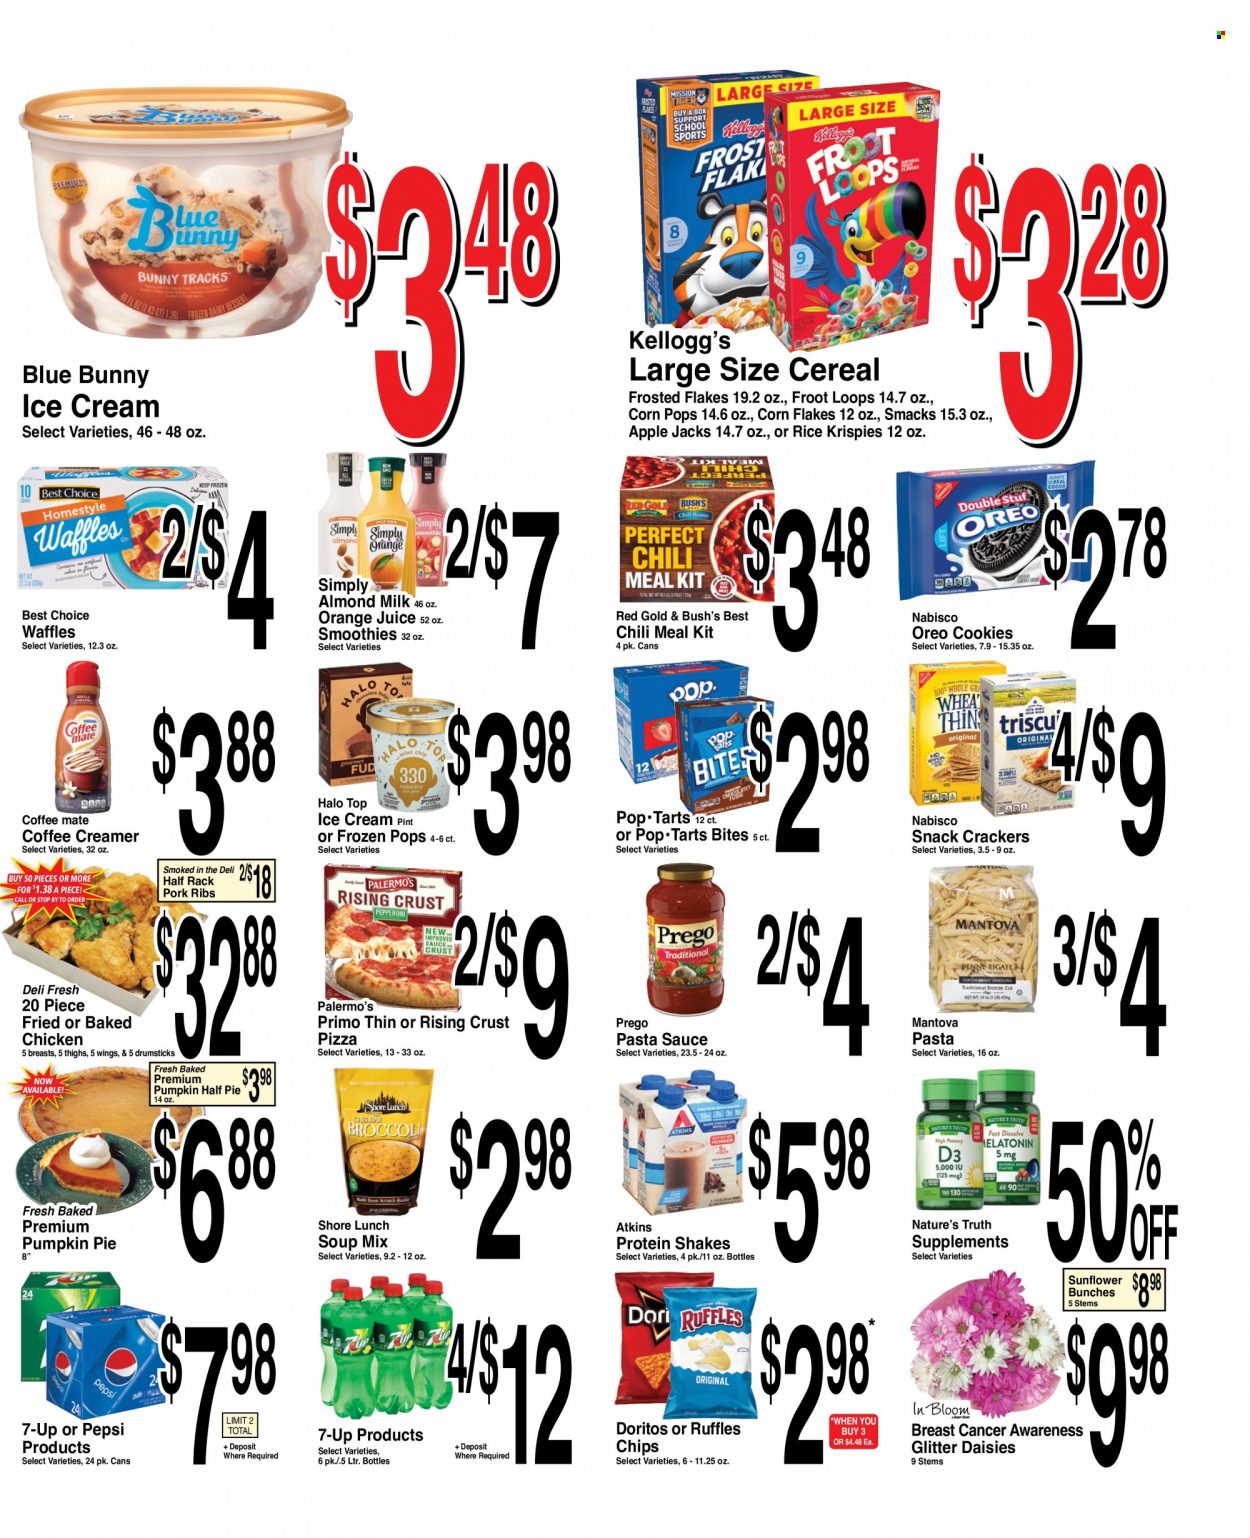 thumbnail - Super Saver Flyer - 09/28/2022 - 10/04/2022 - Sales products - pie, waffles, pumpkin, pizza, pasta sauce, soup mix, soup, sauce, Oreo, almond milk, Coffee-Mate, milk, protein drink, shake, creamer, ice cream, Blue Bunny, cookies, snack, crackers, Kellogg's, Doritos, Ruffles, cereals, corn flakes, Rice Krispies, Frosted Flakes, Corn Pops, Pepsi, orange juice, juice, 7UP, smoothie, pork meat, pork ribs, bunches, sunflower. Page 3.